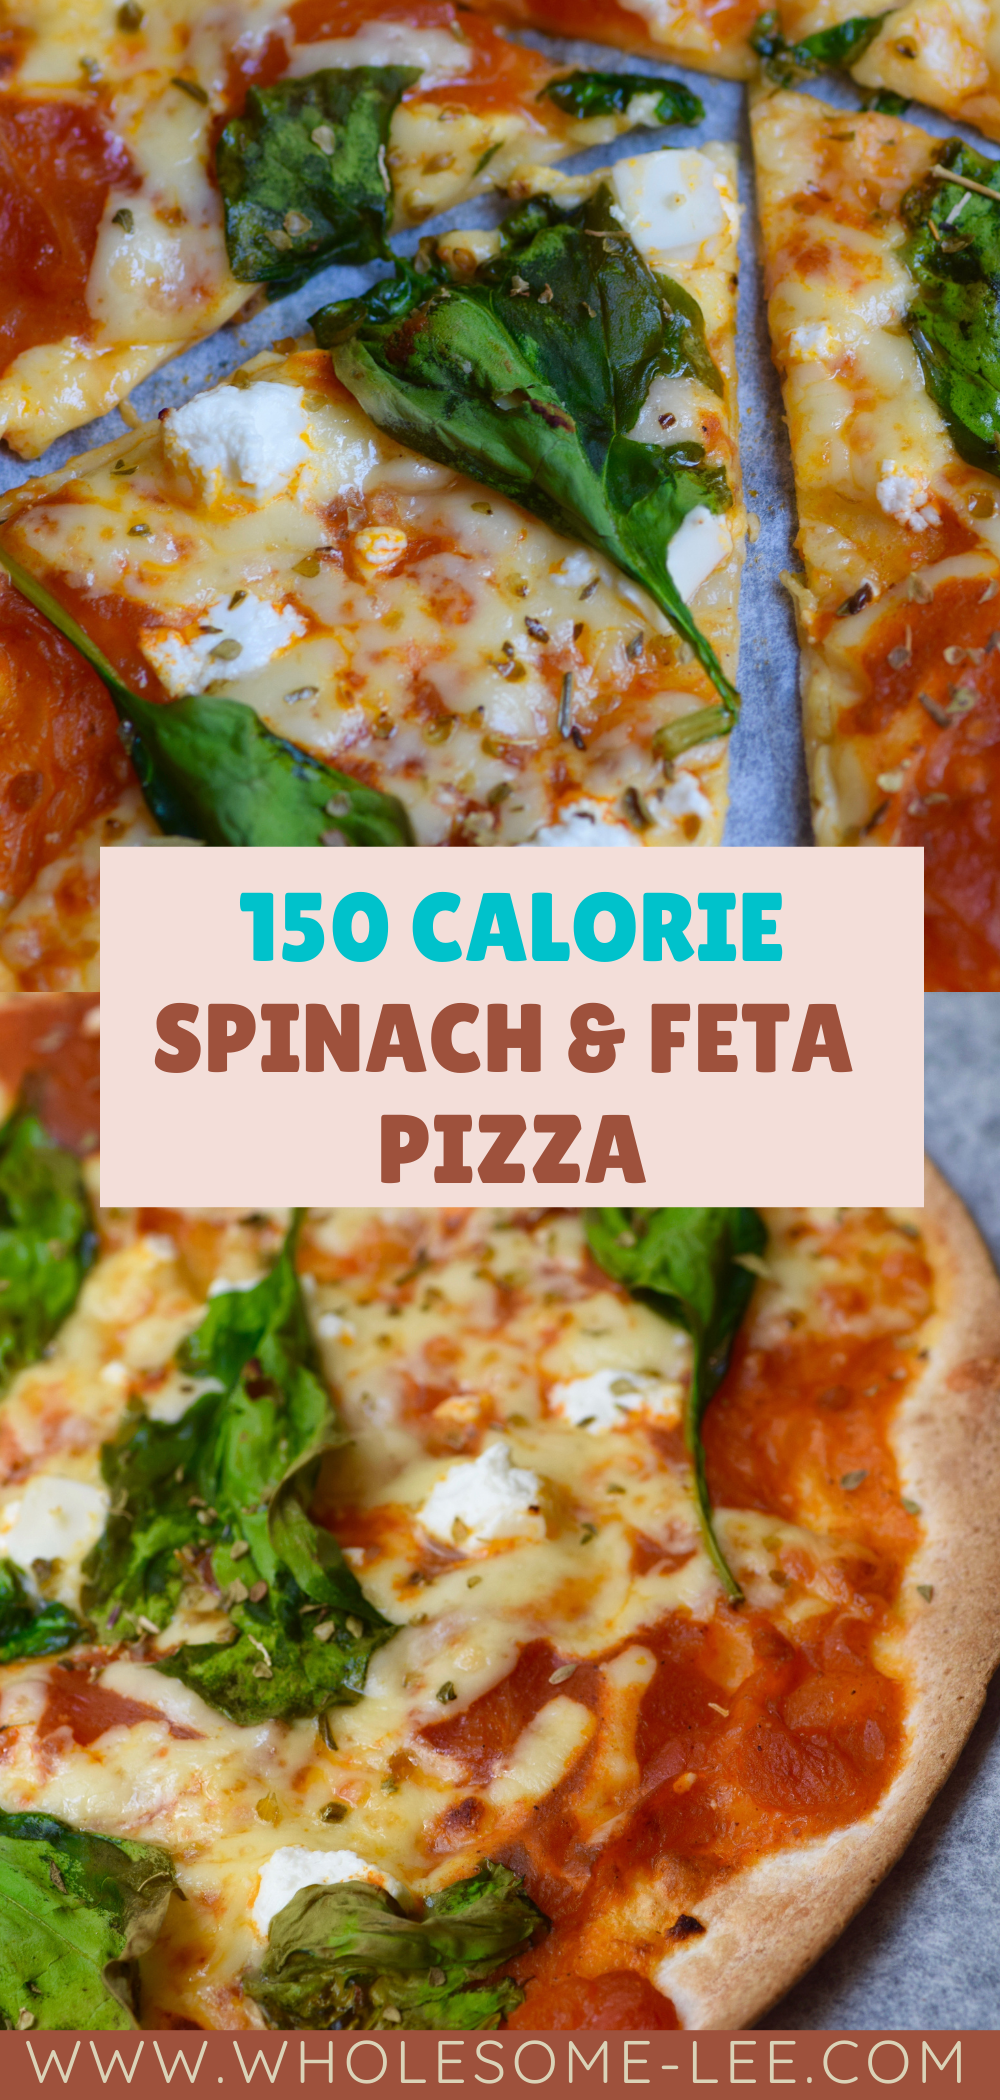 150 calorie spinach and feta pizza